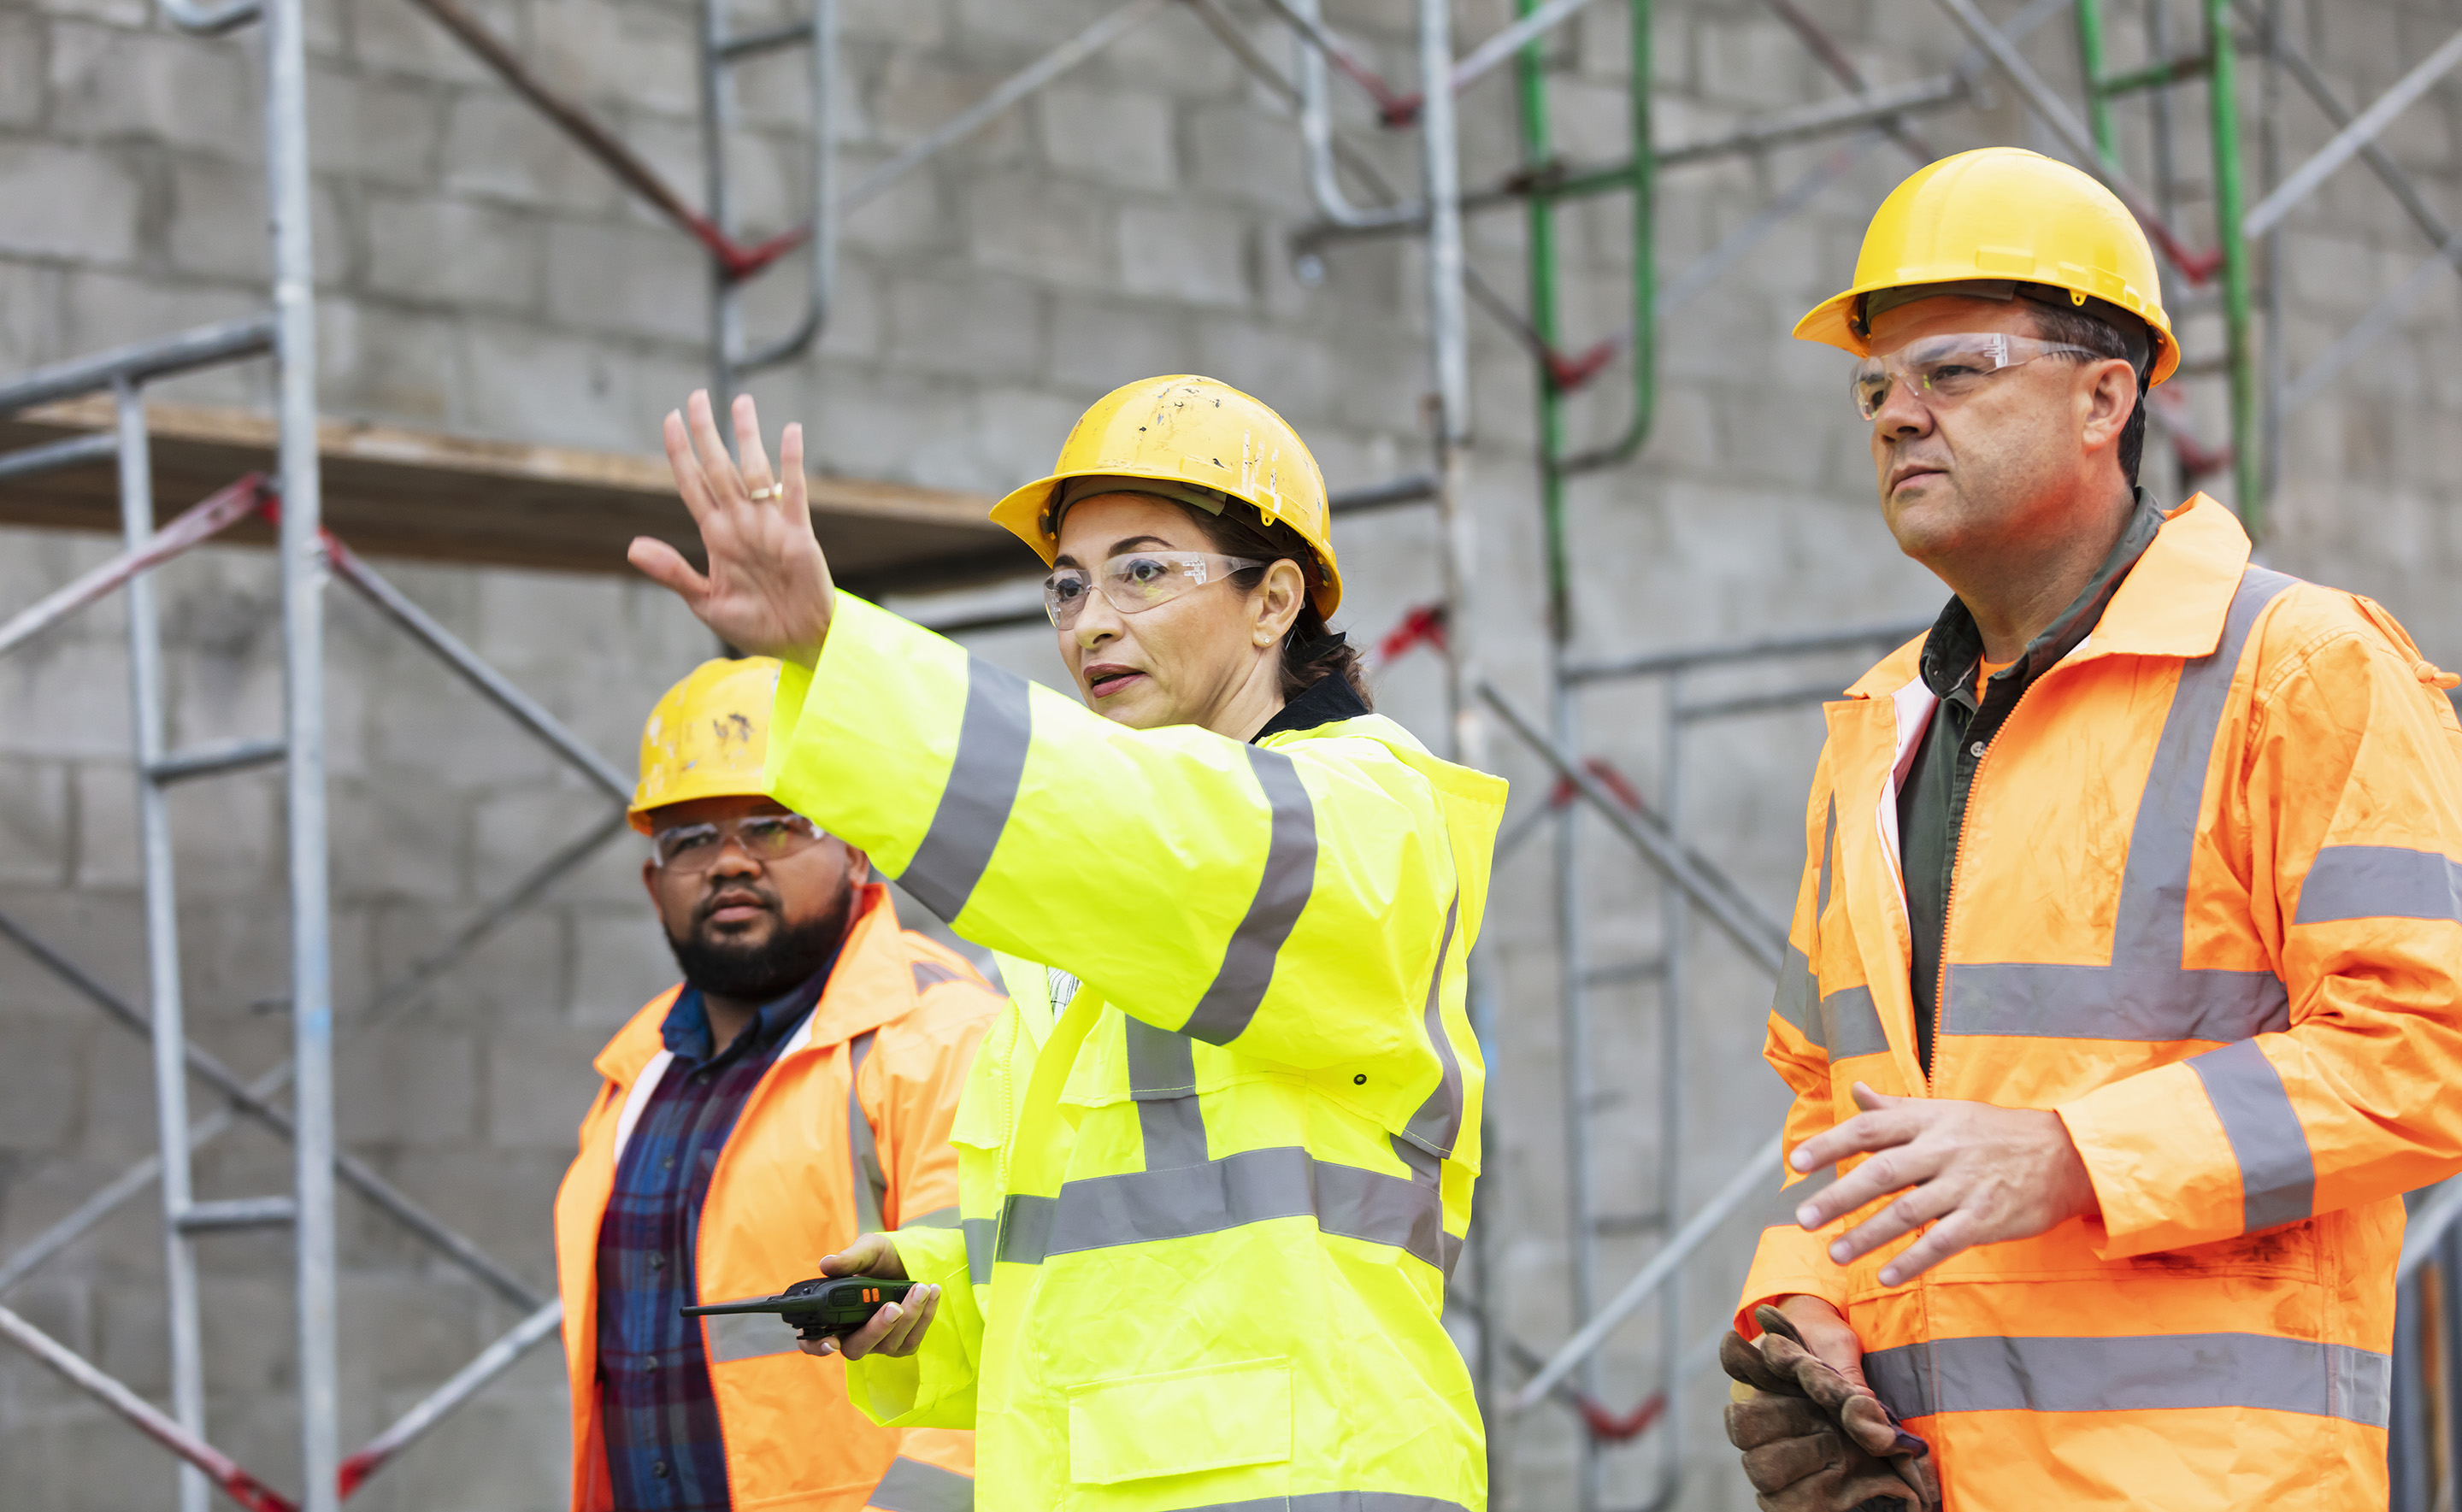 A construction manager with her crew surveying a job site.